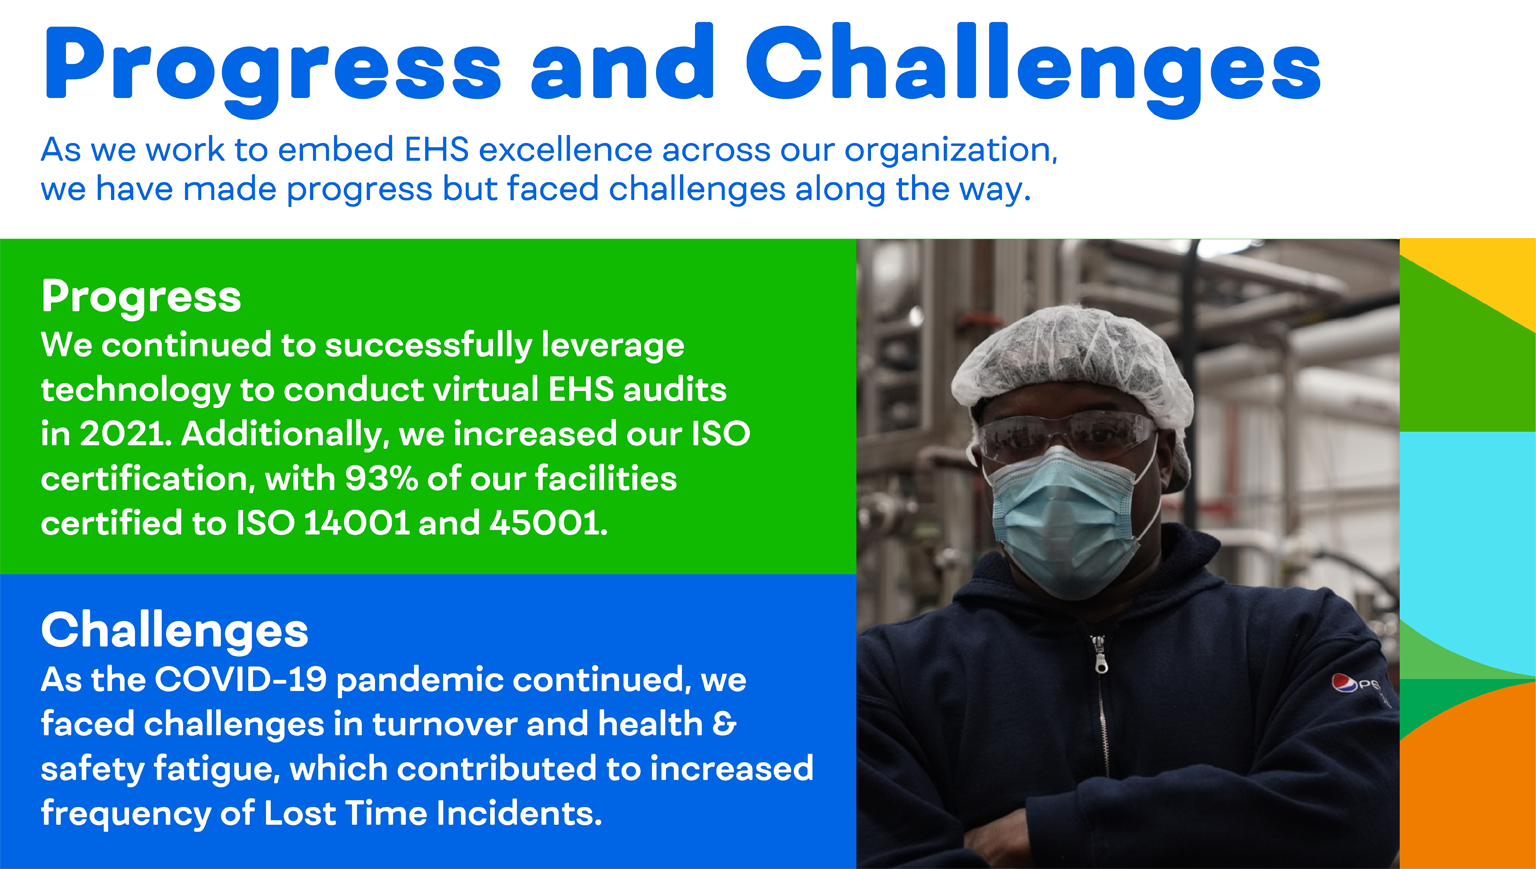 Progress and Challenges: We continued to successfully leverage technology to conduct virtual EHS audits in 2021. As the COVID-19 pandemic continued, we faced challenges in turnover and health & safety fatigue.